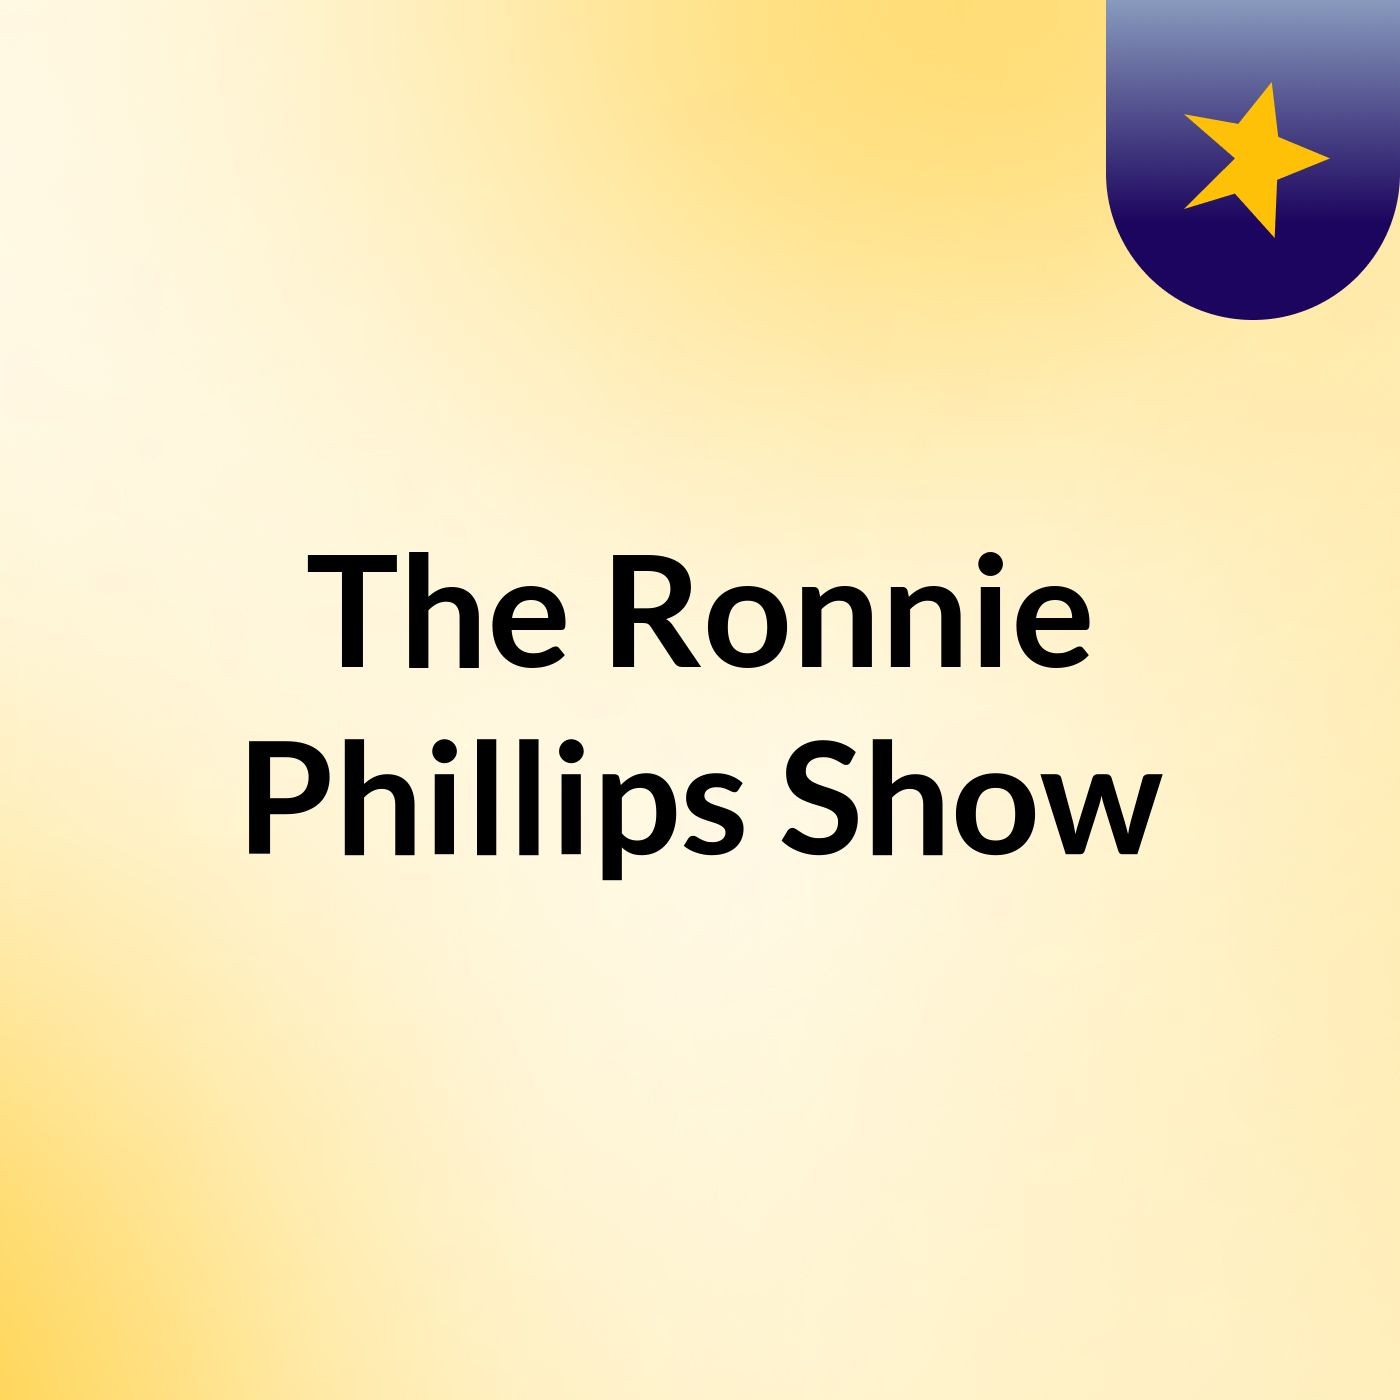 The Ronnie Phillips Show